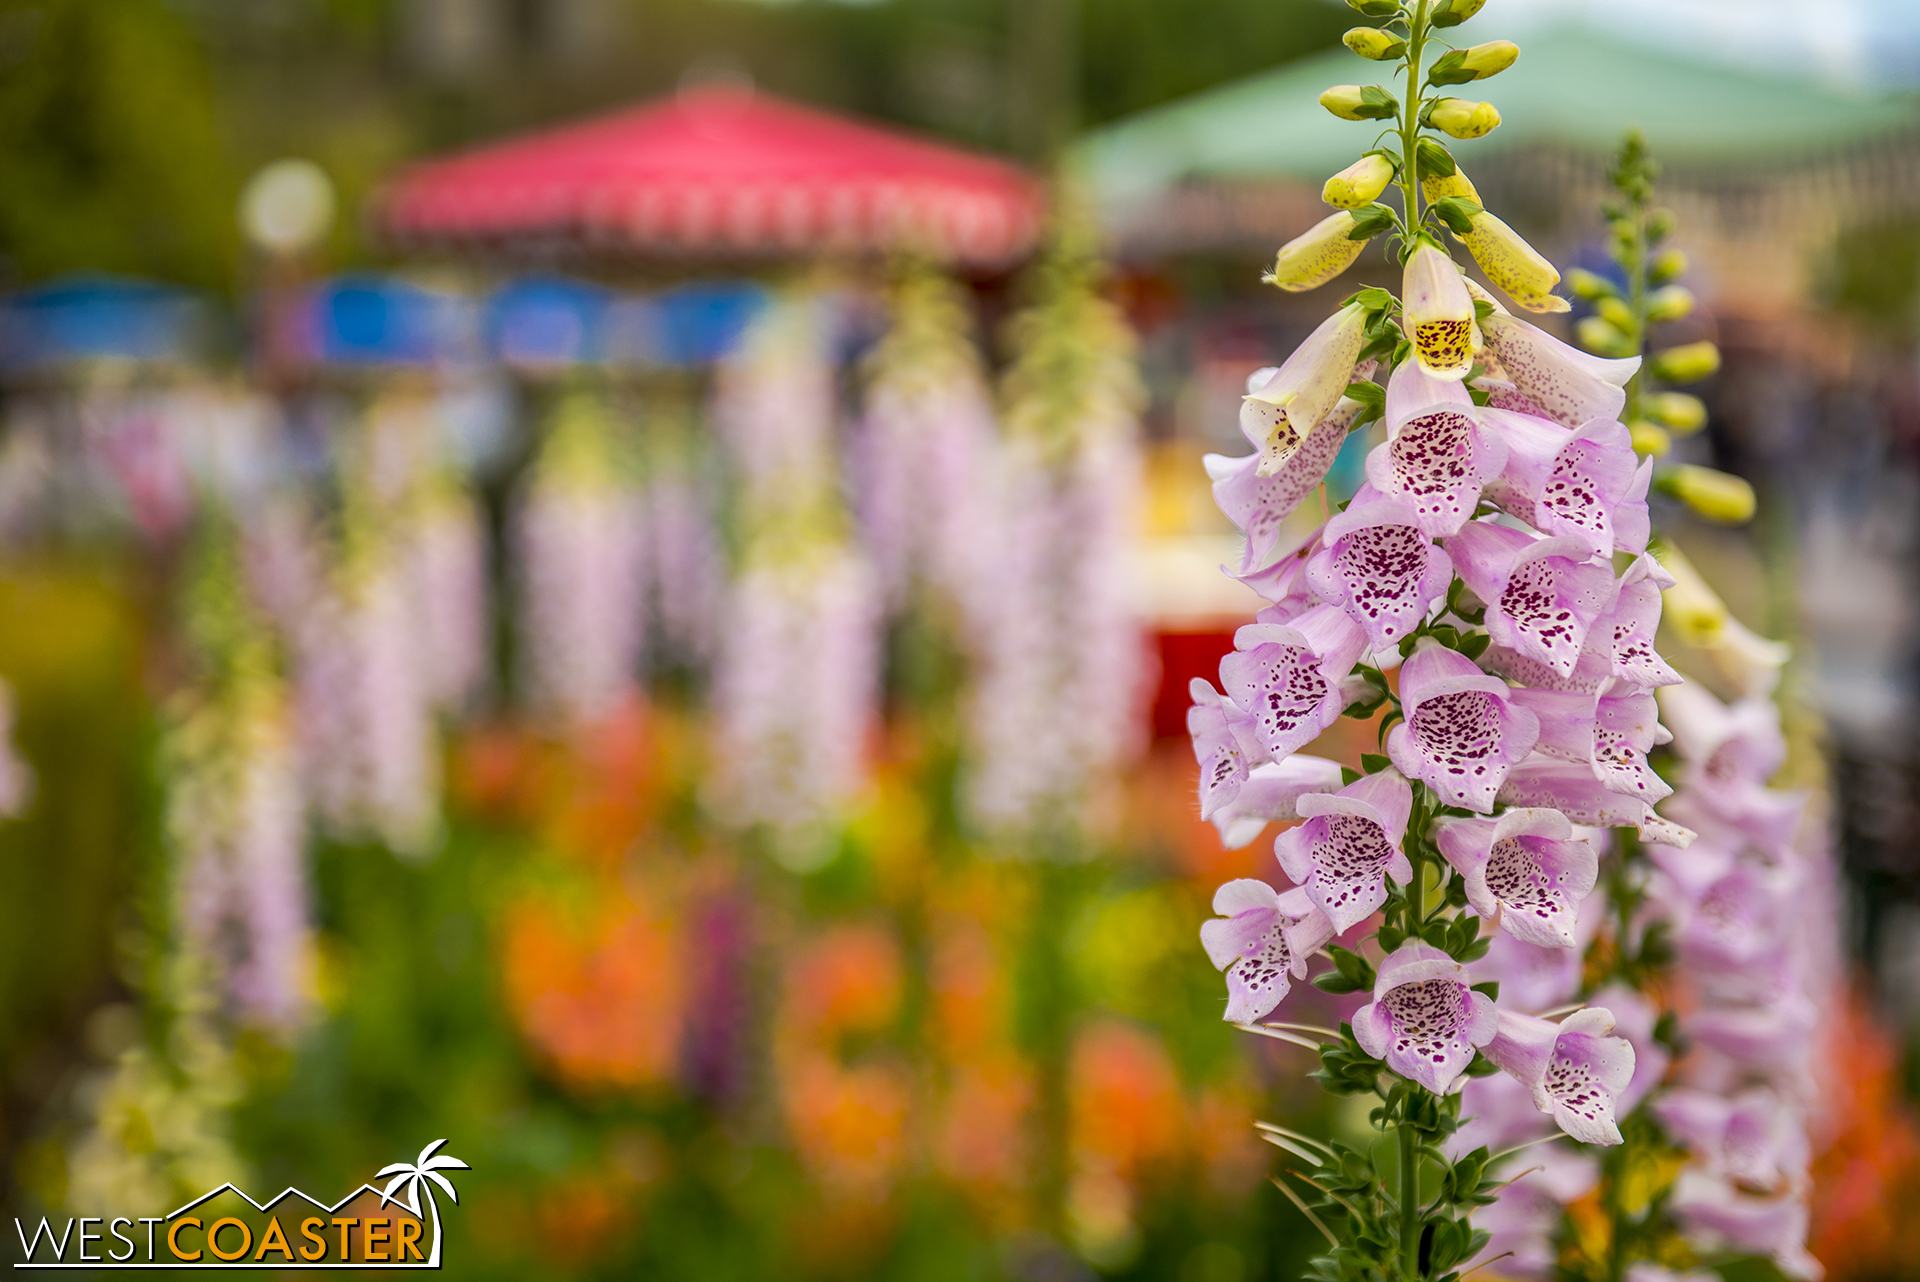  Foxgloves are also the flower of choice during this time of year too, providing beautiful photo ops. 